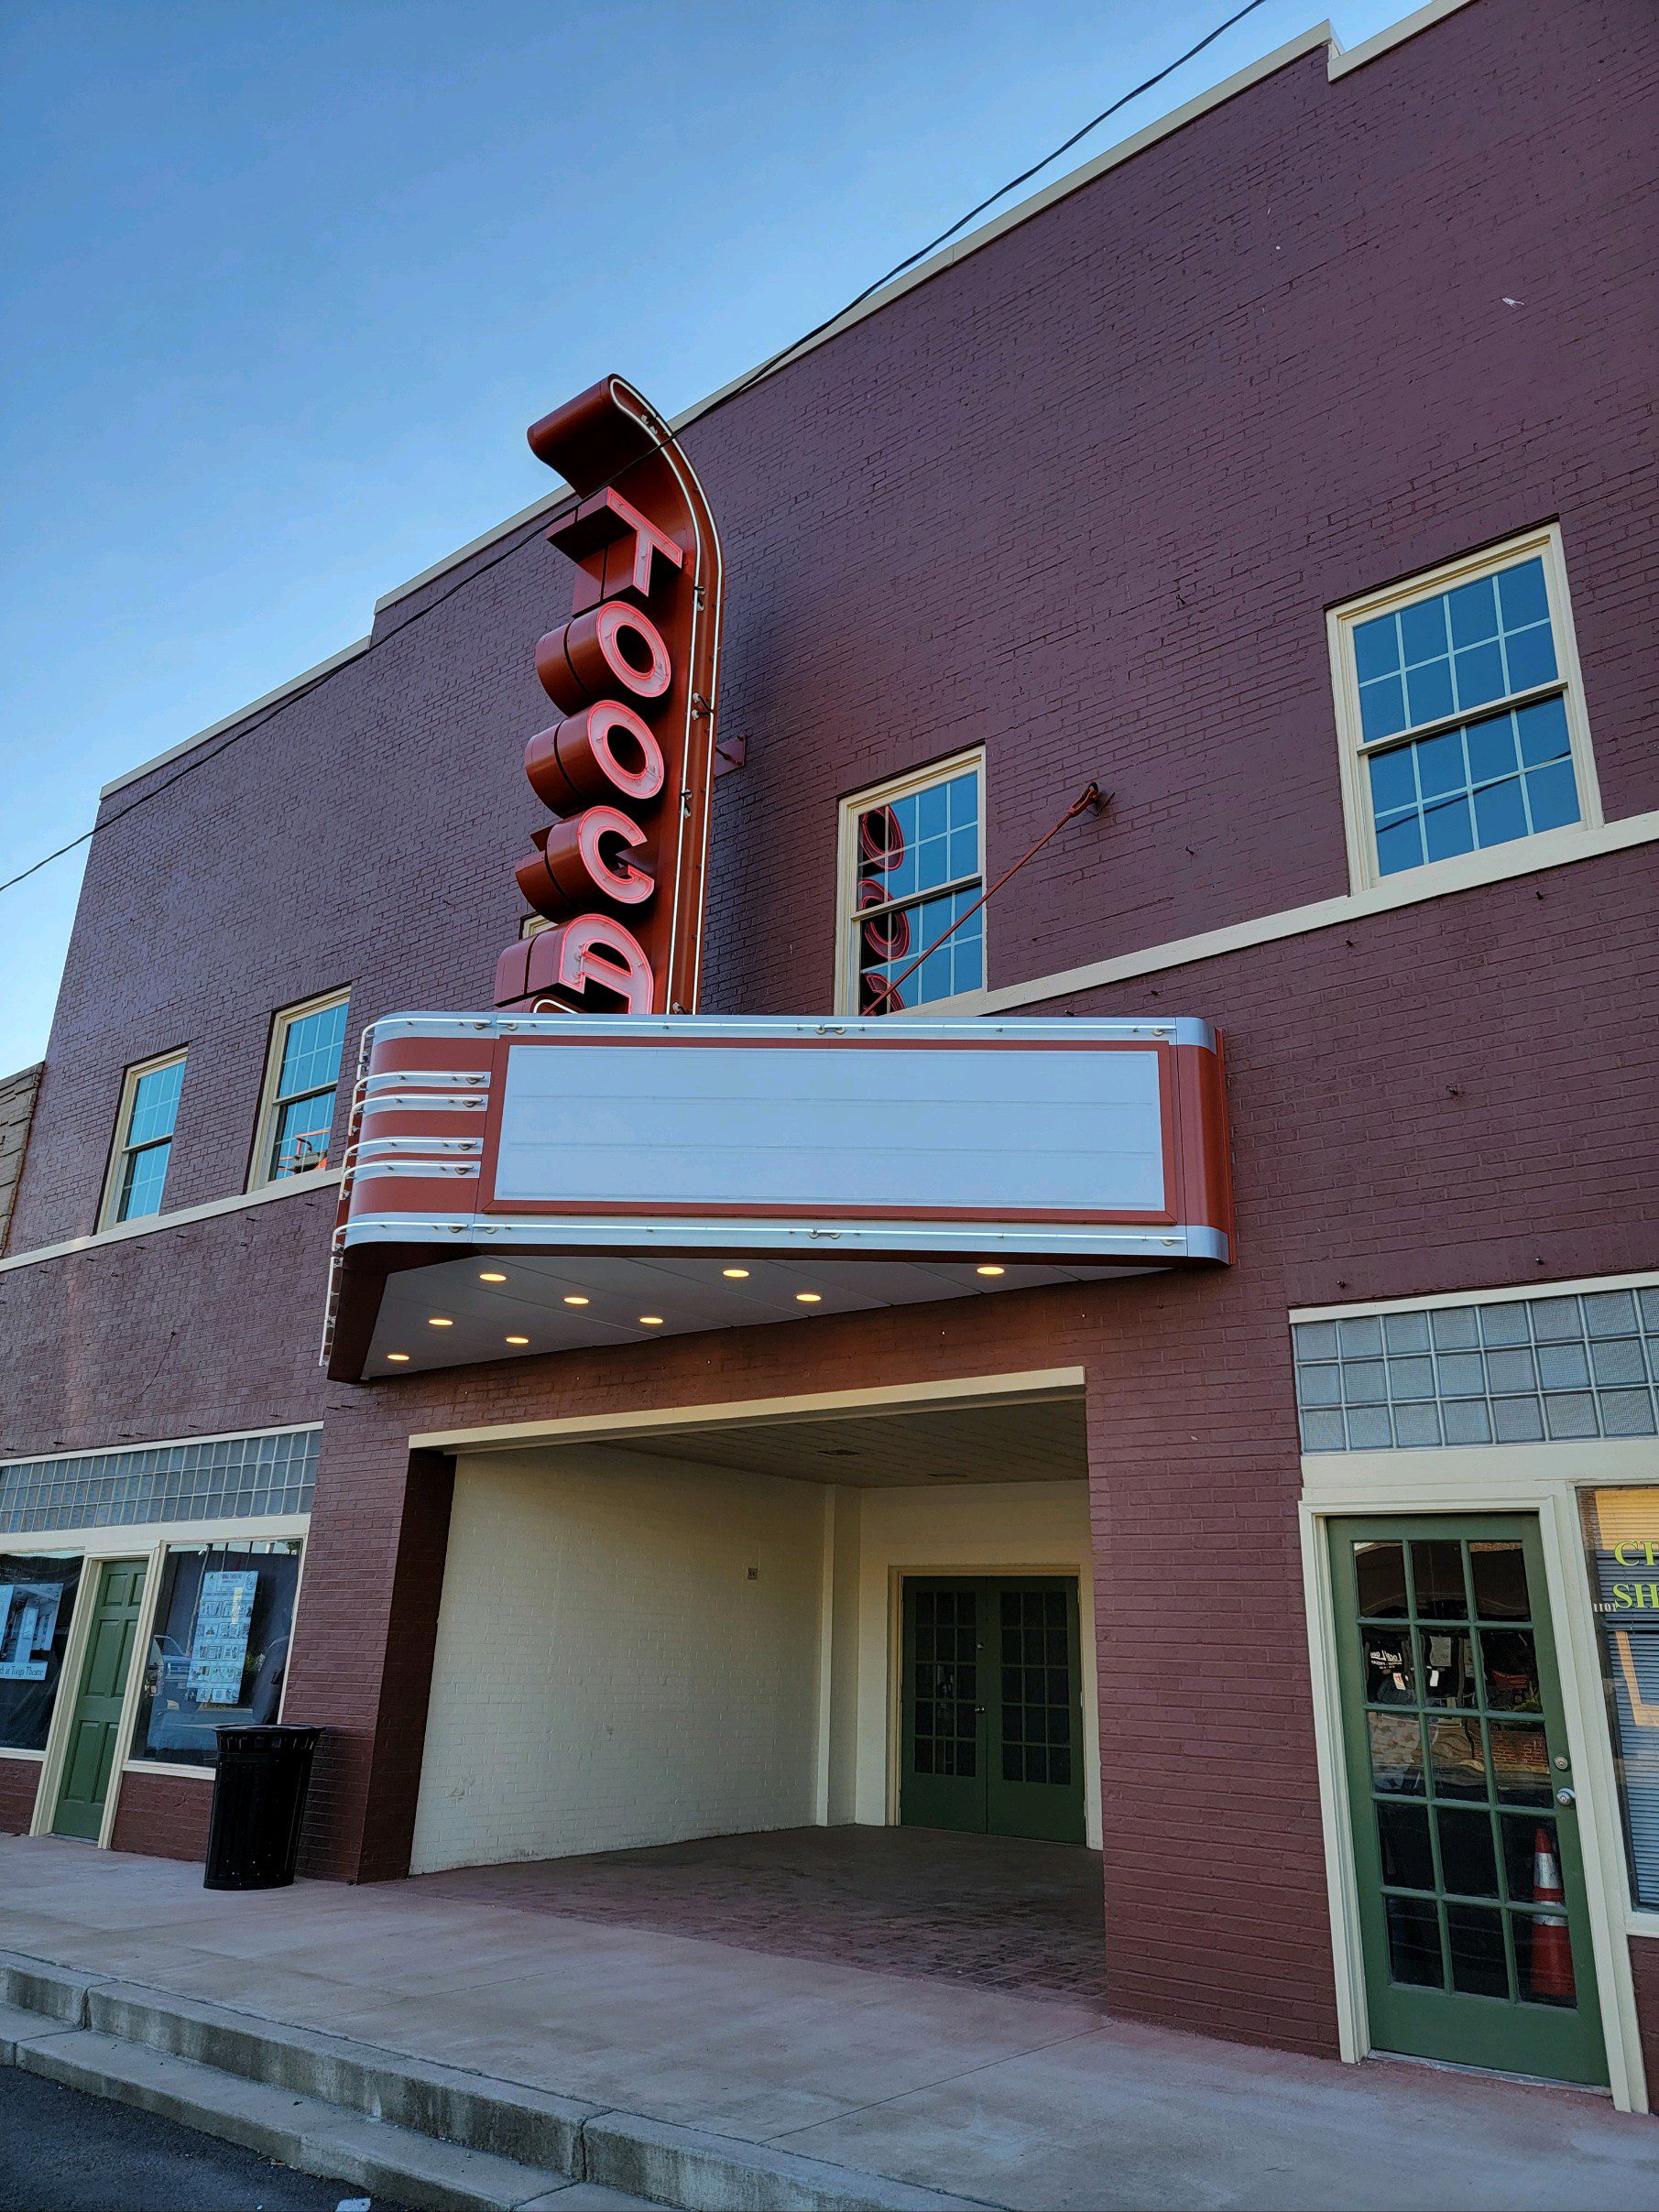 Tooga Theater sign and marquee during the daytime | Wagner Electric Sign Co.